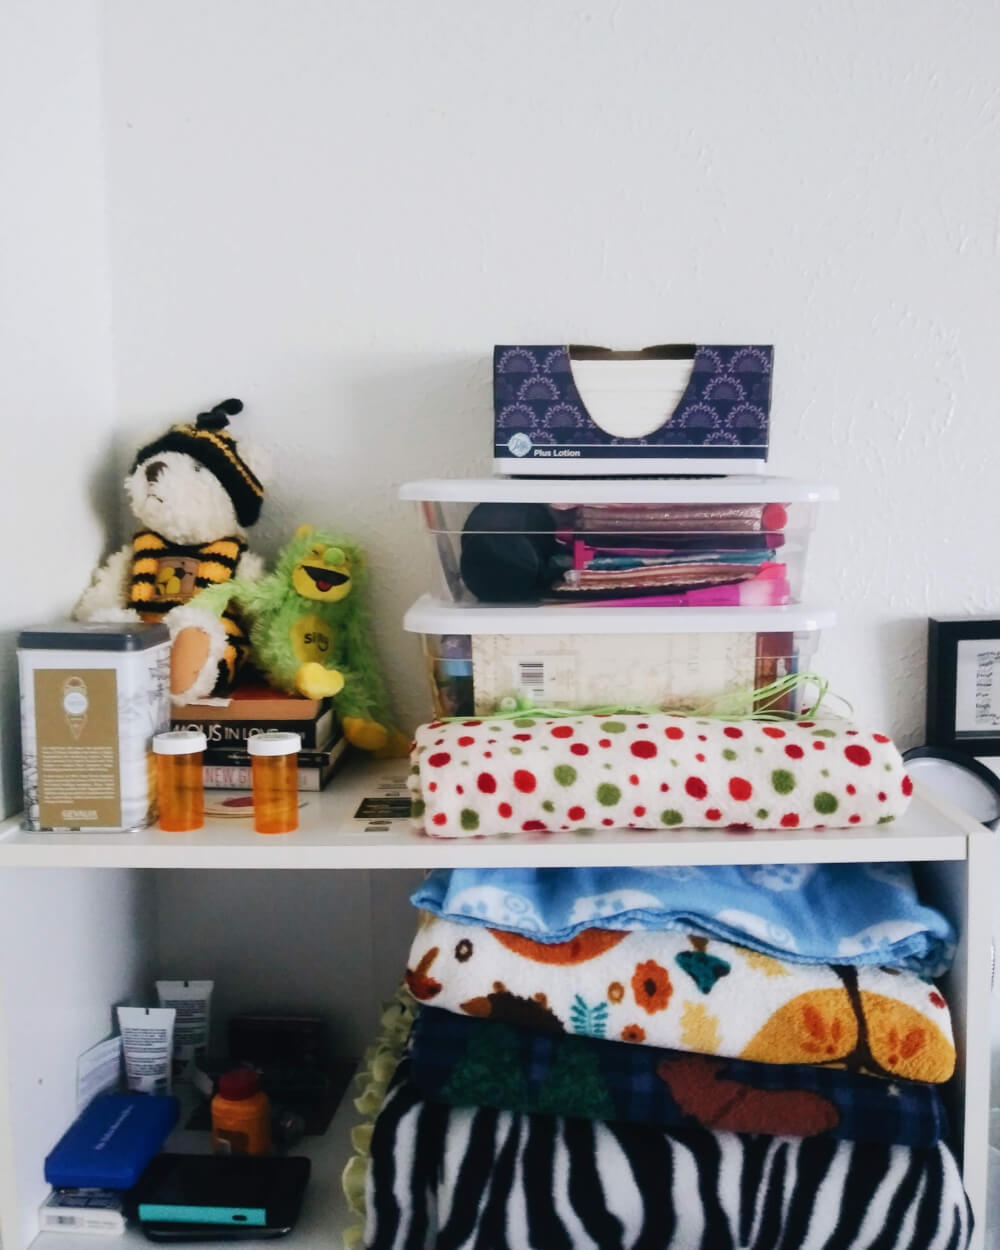 Bookshelve holding various paraphernalia, including blankets and two clear containers